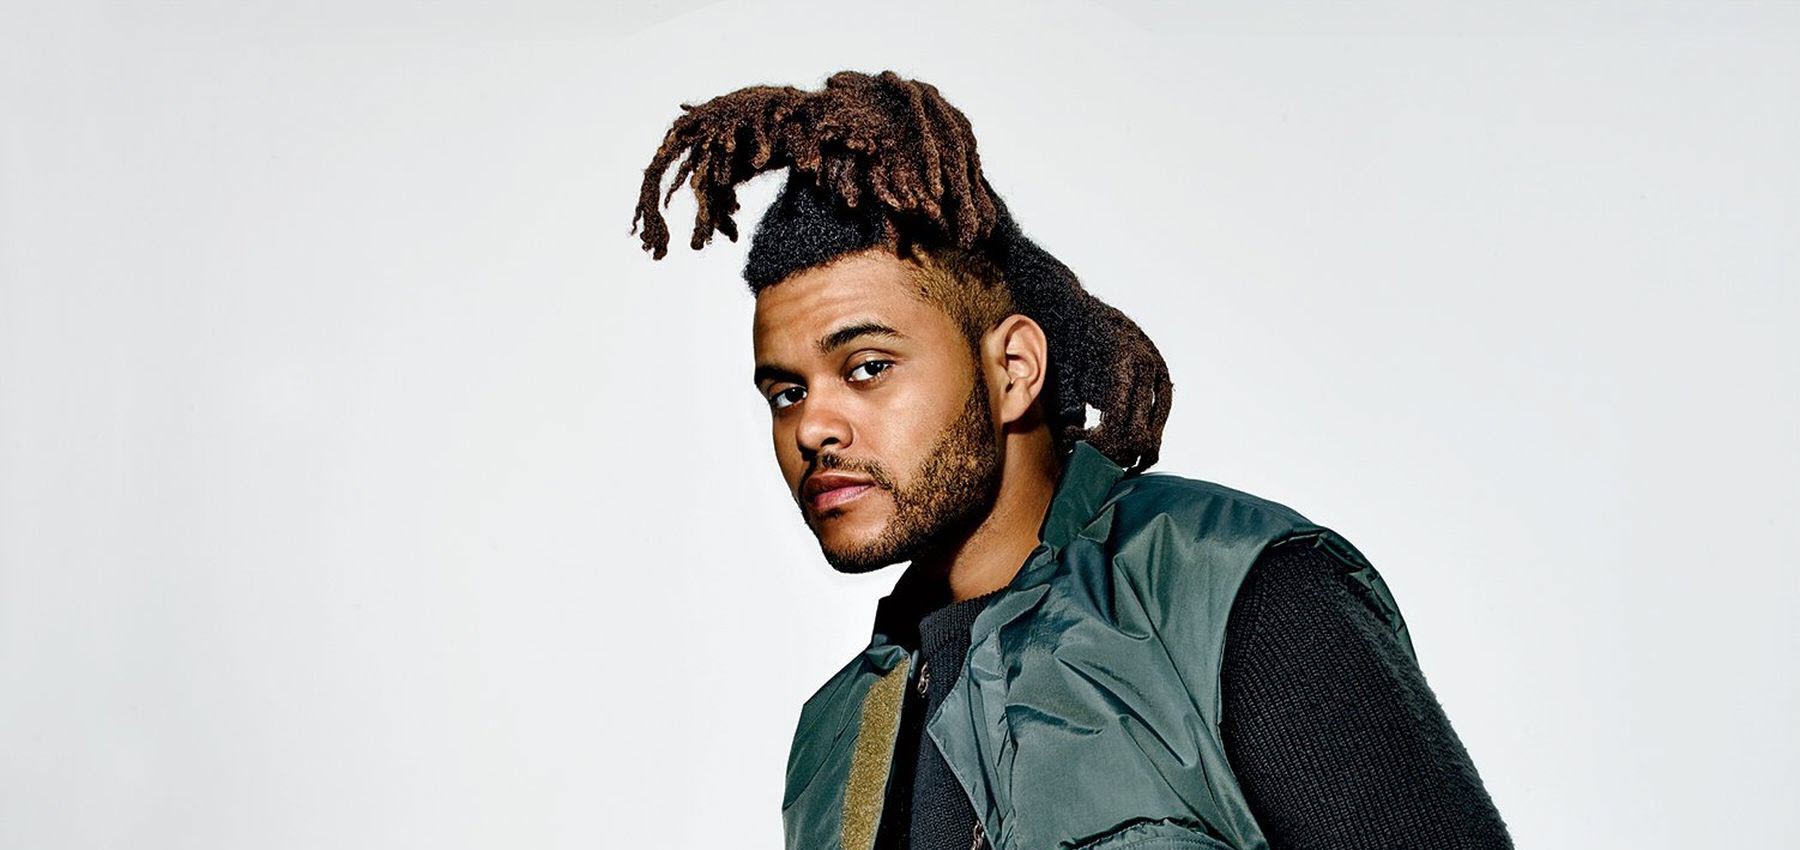 The Weeknd Backgrounds, Compatible - PC, Mobile, Gadgets| 1800x850 px